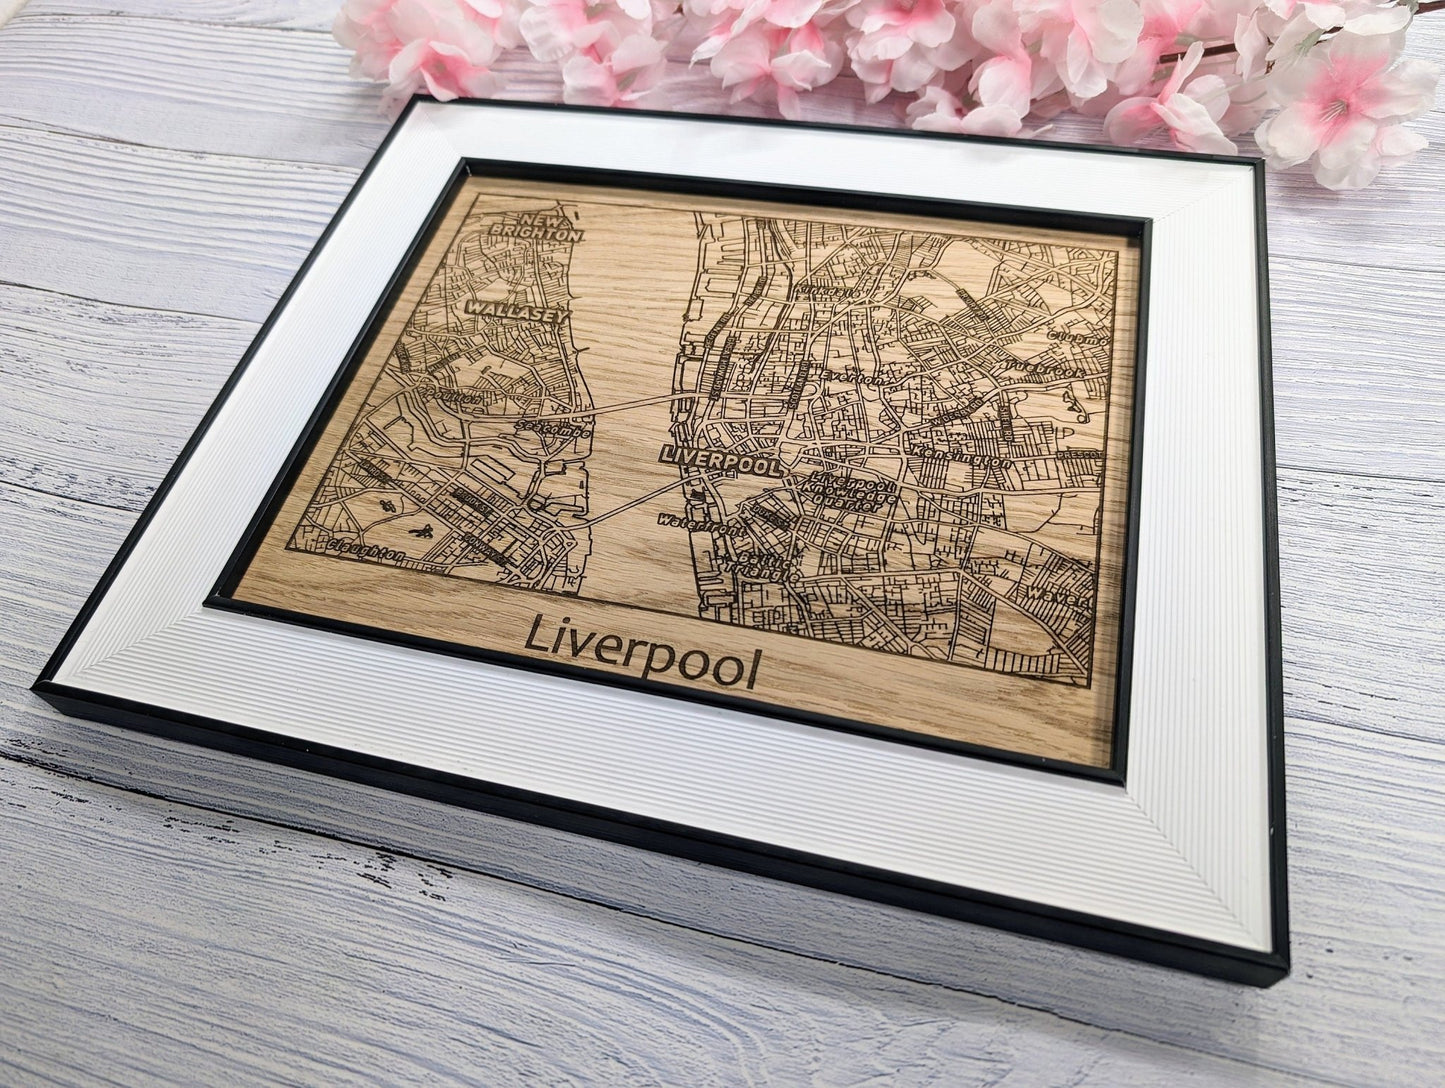 Framed Wooden Liverpool Map - Oak City Map with Wirral, Wallasey & New Brighton | 253x202mm, Table or Wall Mount, Monochrome Frame - CherryGroveCraft